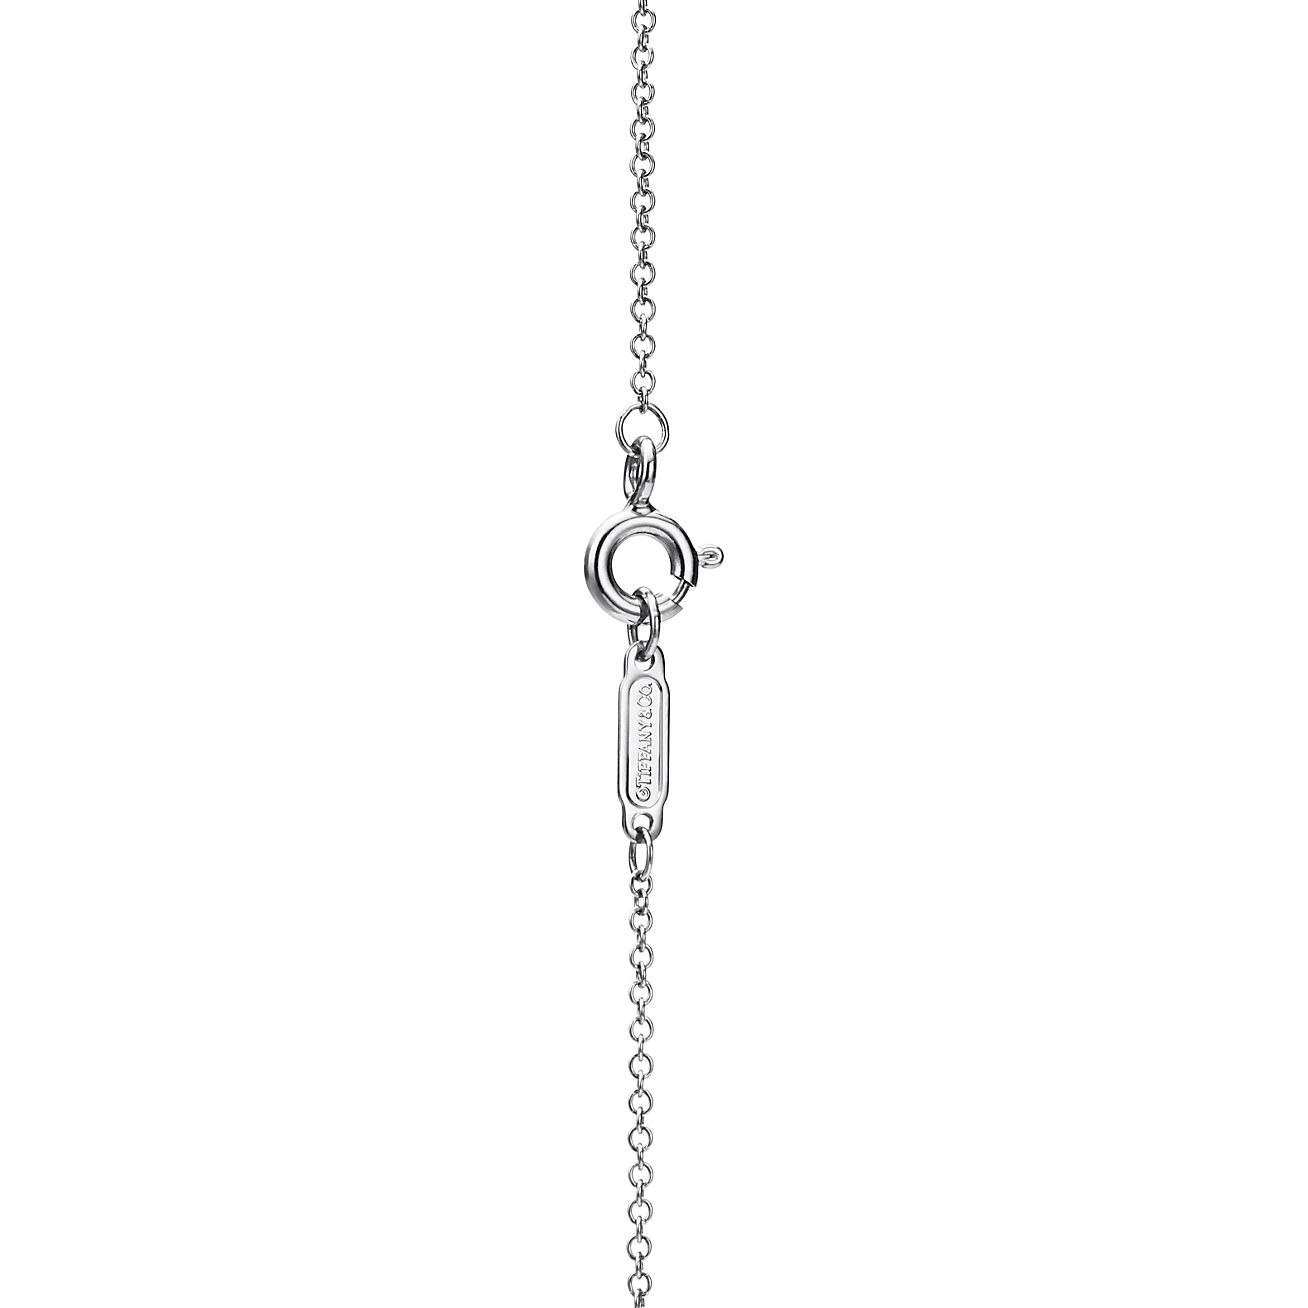 Tiffany Soleste Pendant in Platinum with A Sapphire and Diamonds, Size: 16 in.